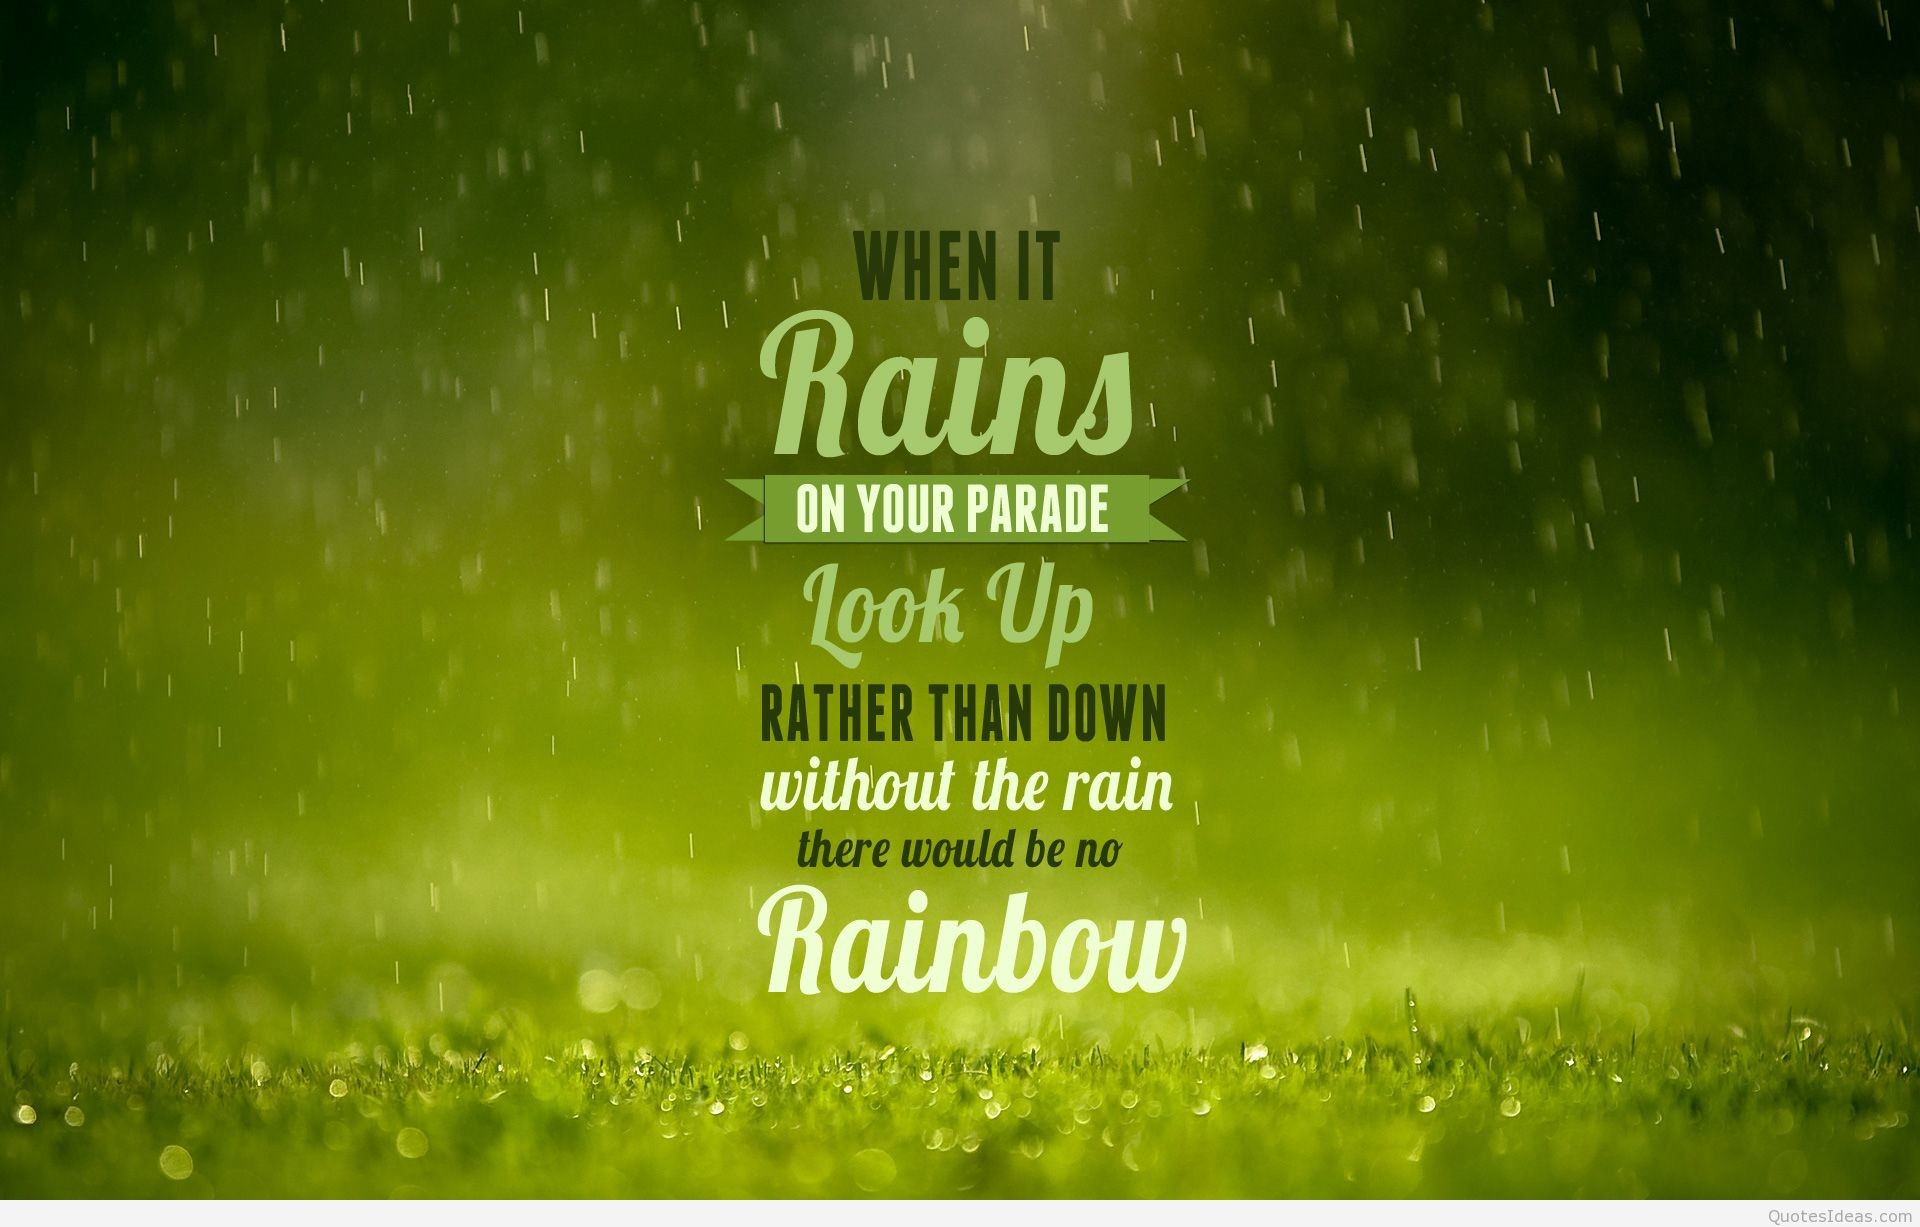 Quotes and Sayings: Rain Quotations Wallpapers